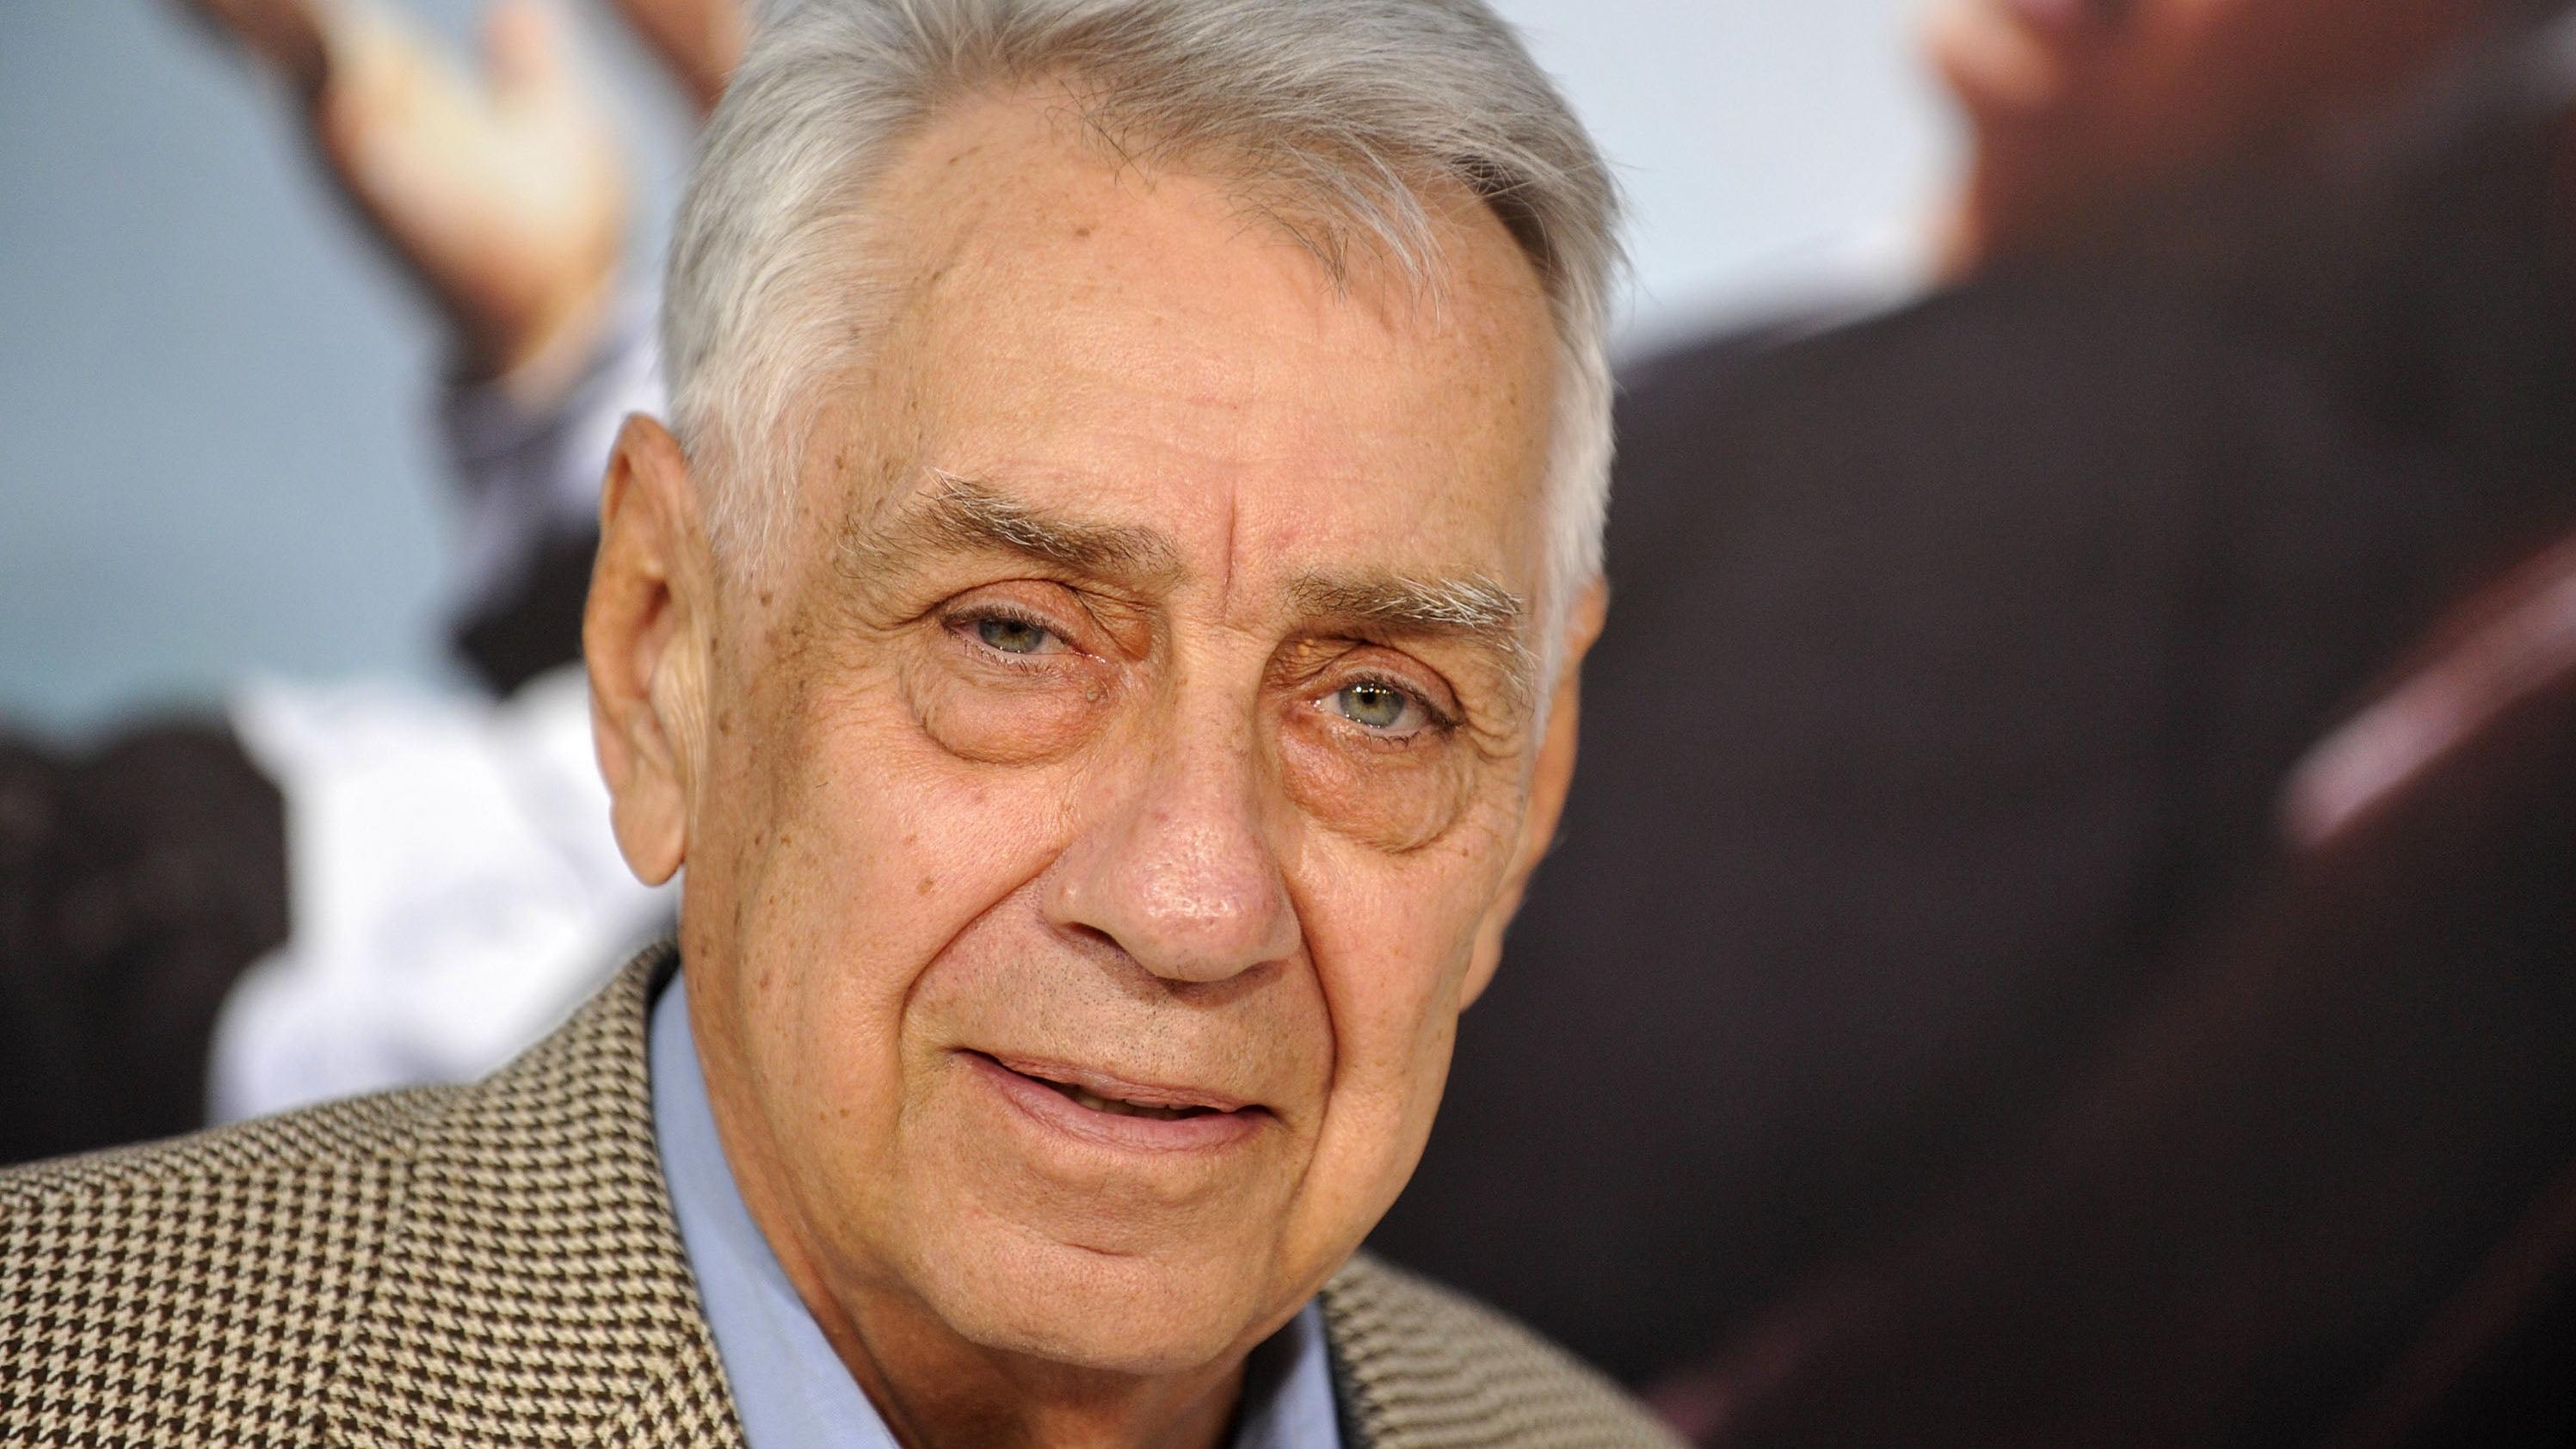 R.I.P. Philip Baker Hall, prolific character actor from Seinfeld and Boogie Nights